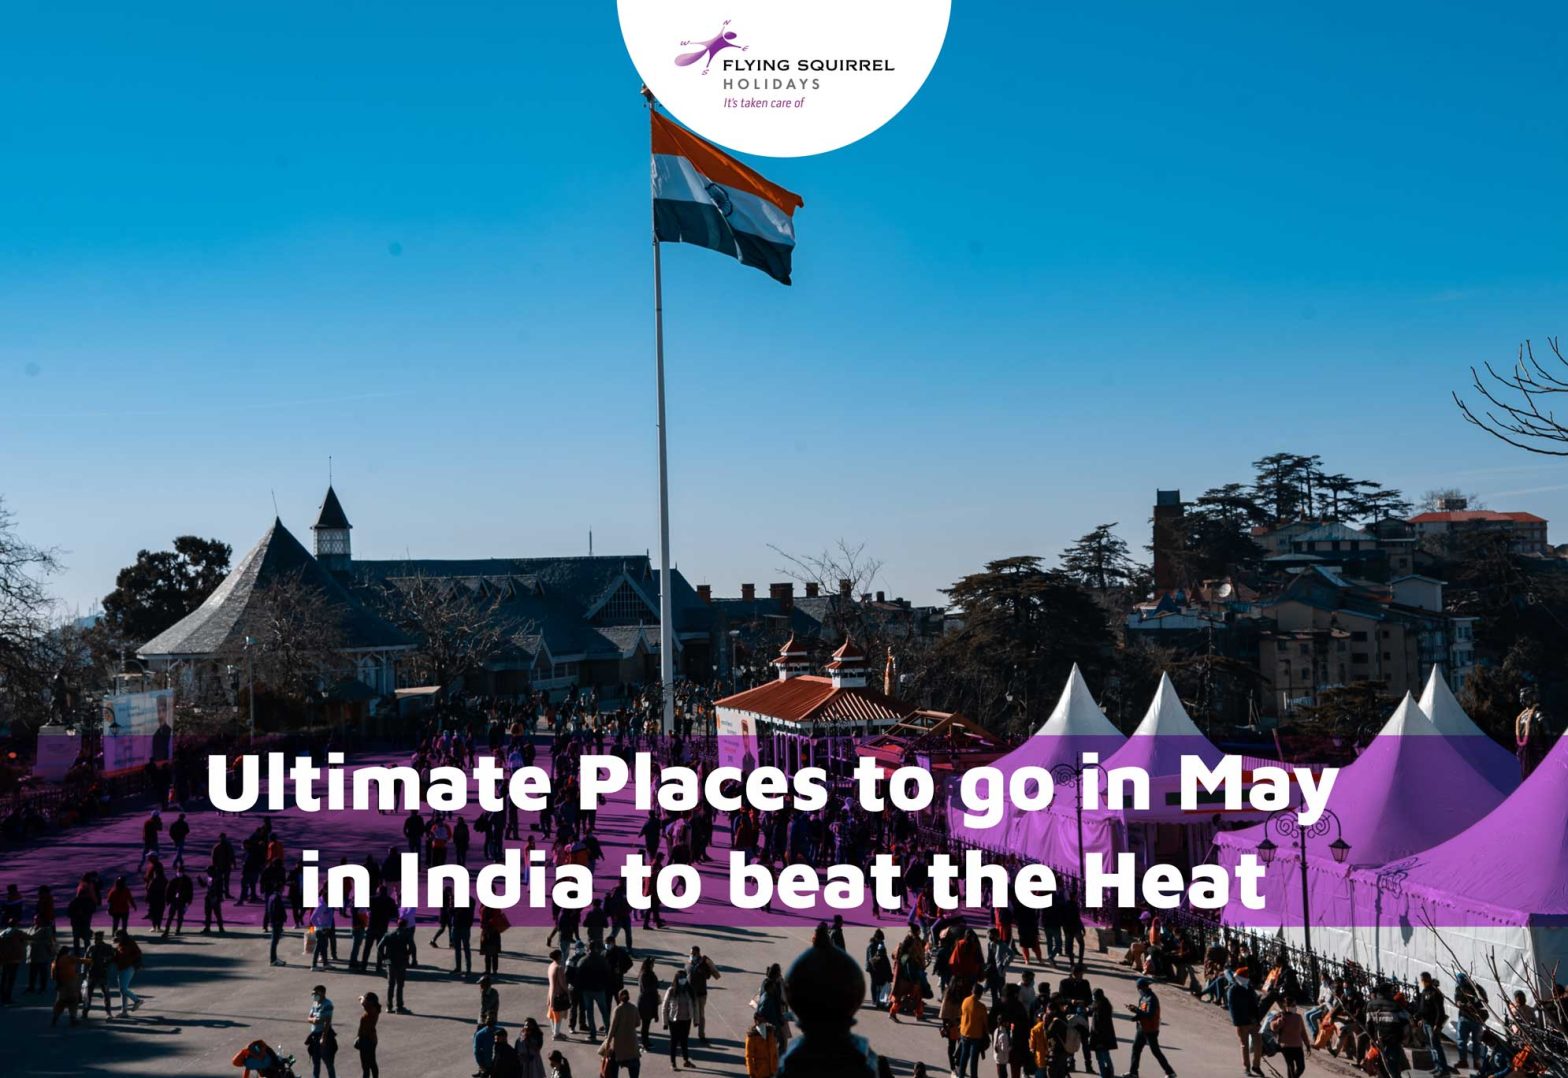 Ultimate Places to go in May in India to beat the Heat